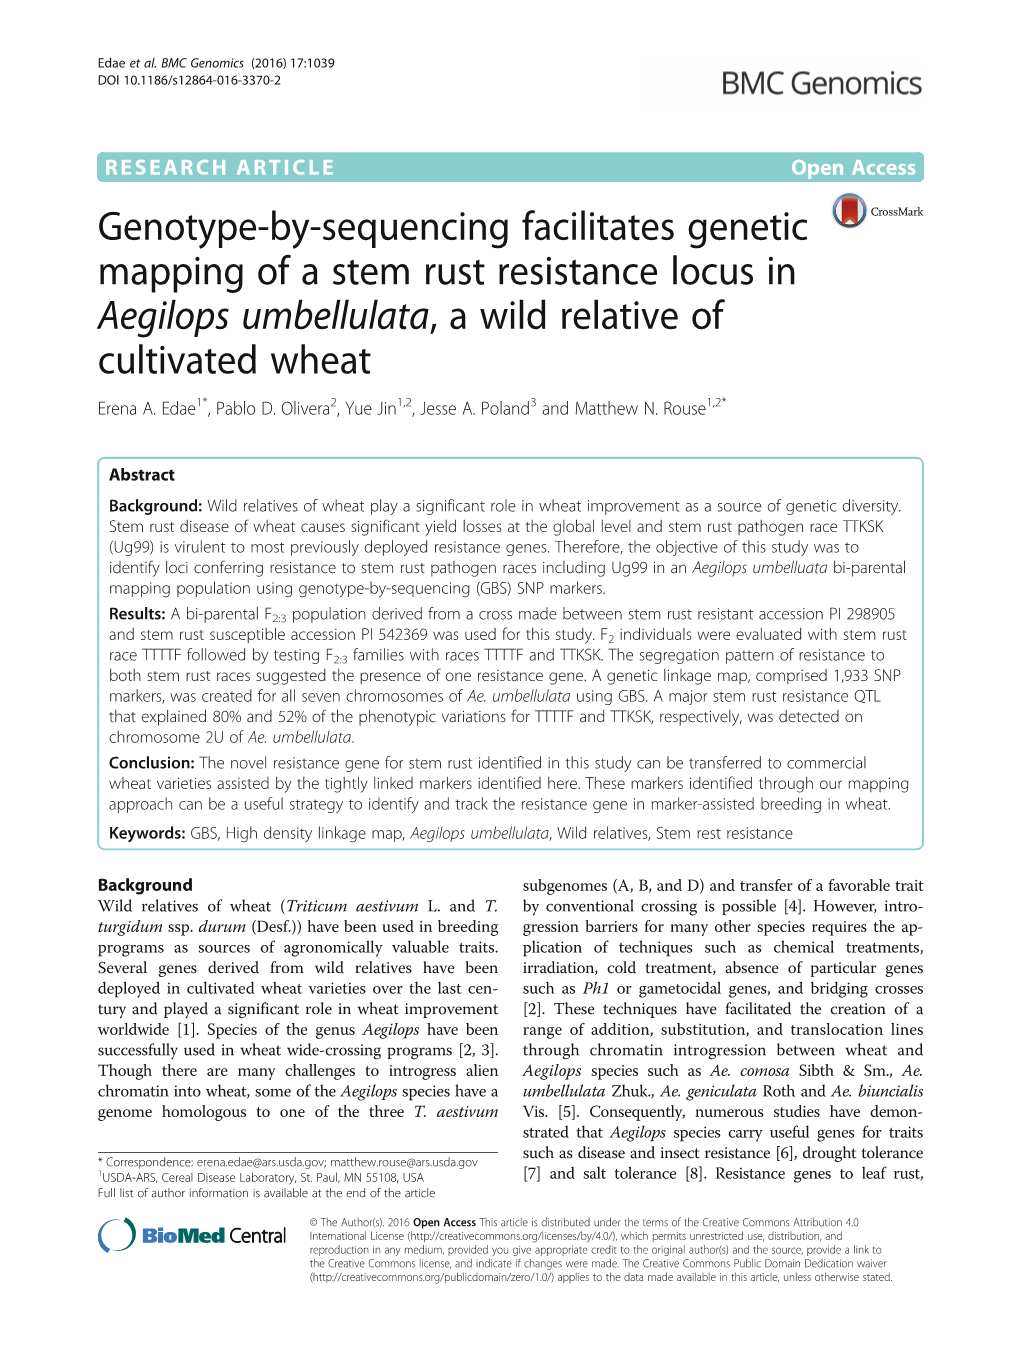 Genotype-By-Sequencing Facilitates Genetic Mapping of a Stem Rust Resistance Locus in Aegilops Umbellulata, a Wild Relative of Cultivated Wheat Erena A